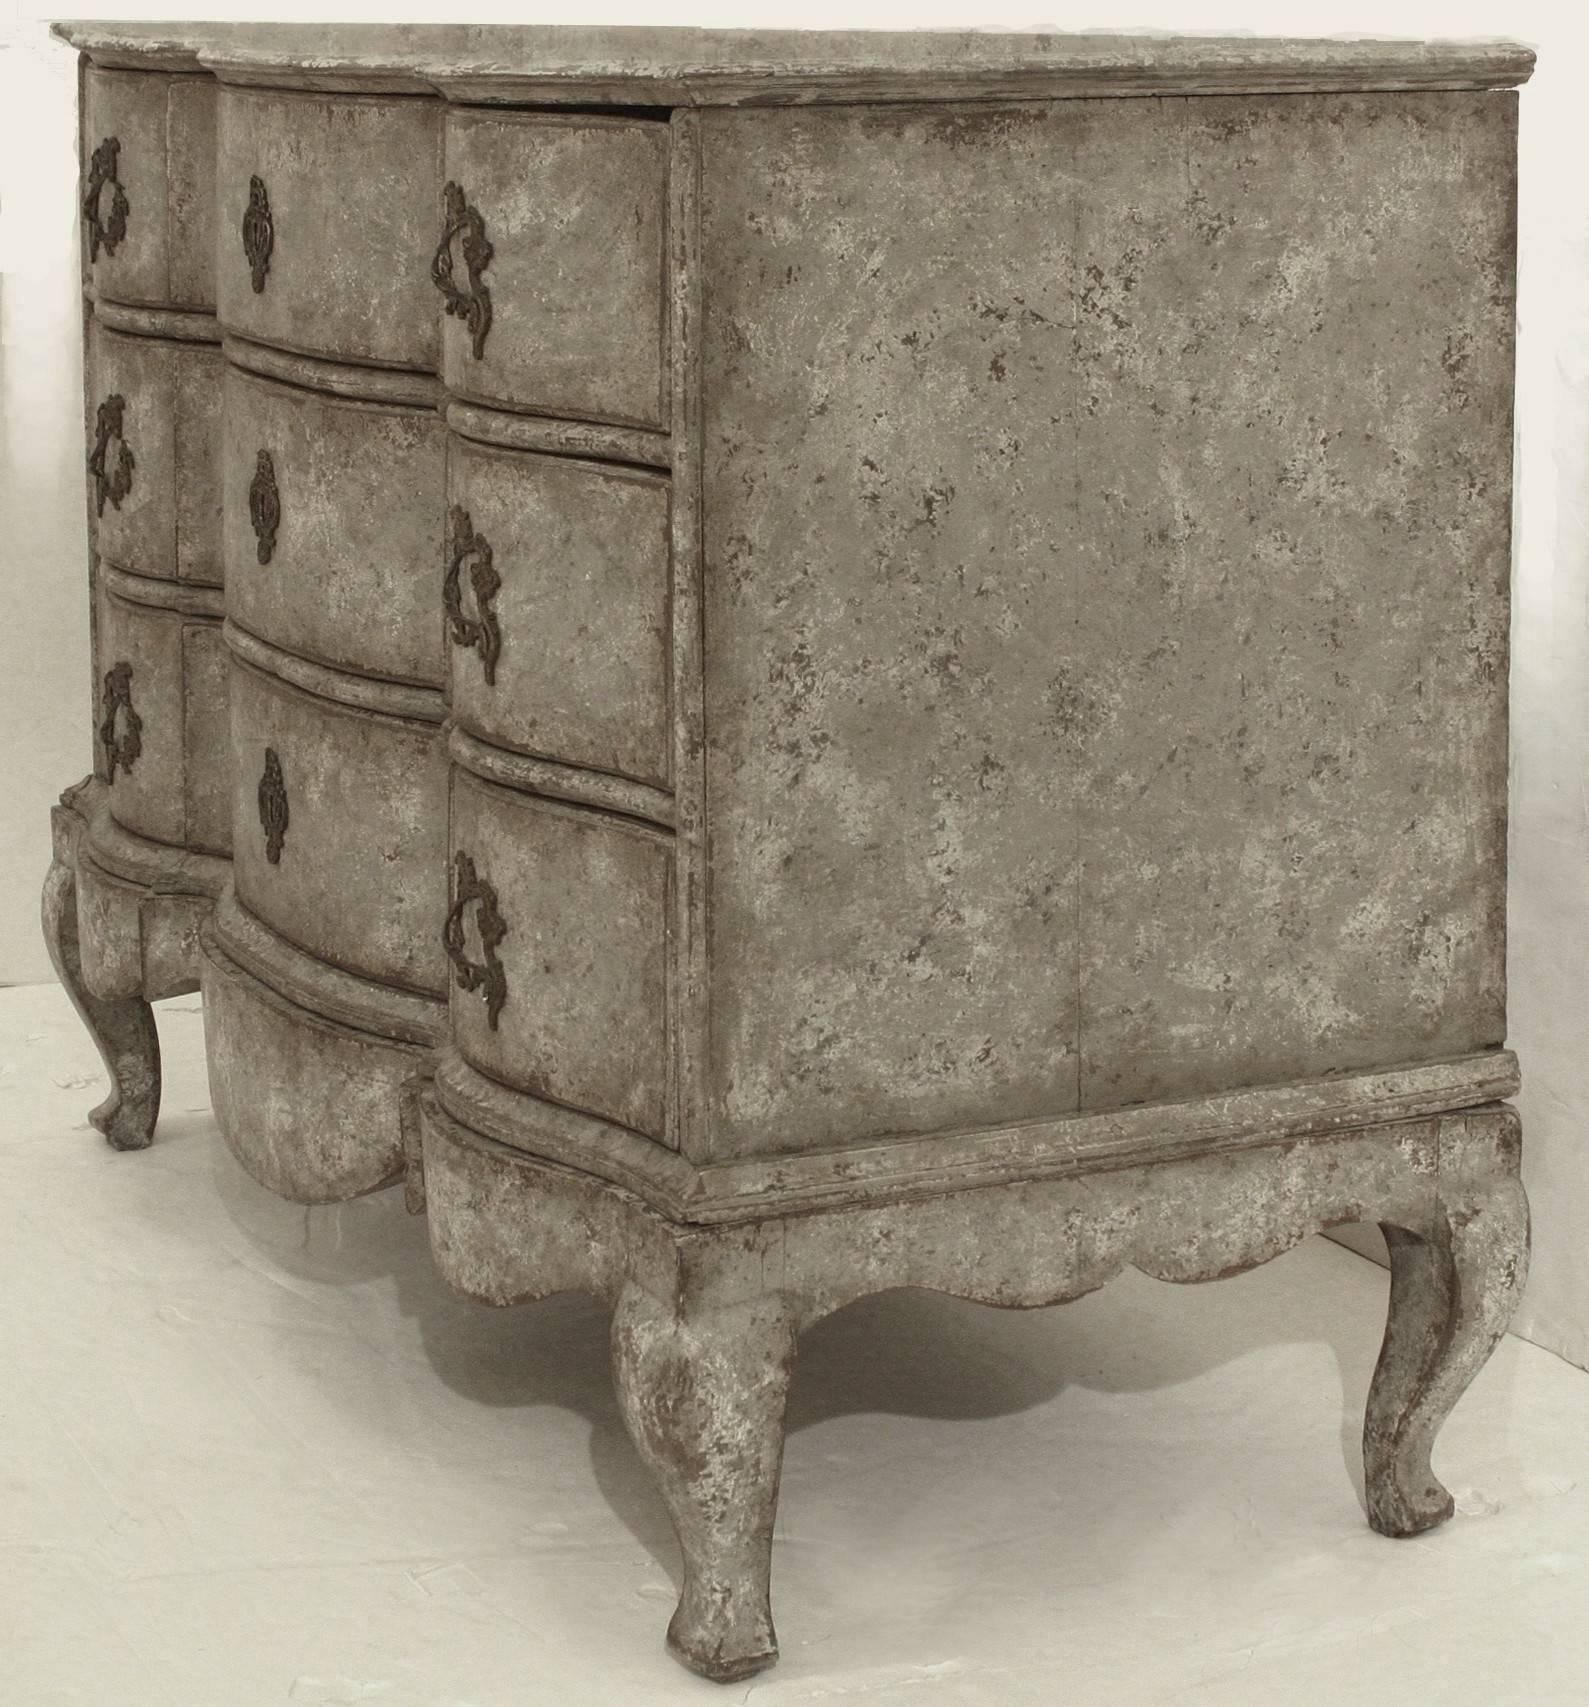 Rococo period commode with serpentine front and cabriole legs. Beautiful and weathered original brass hardware and paint.